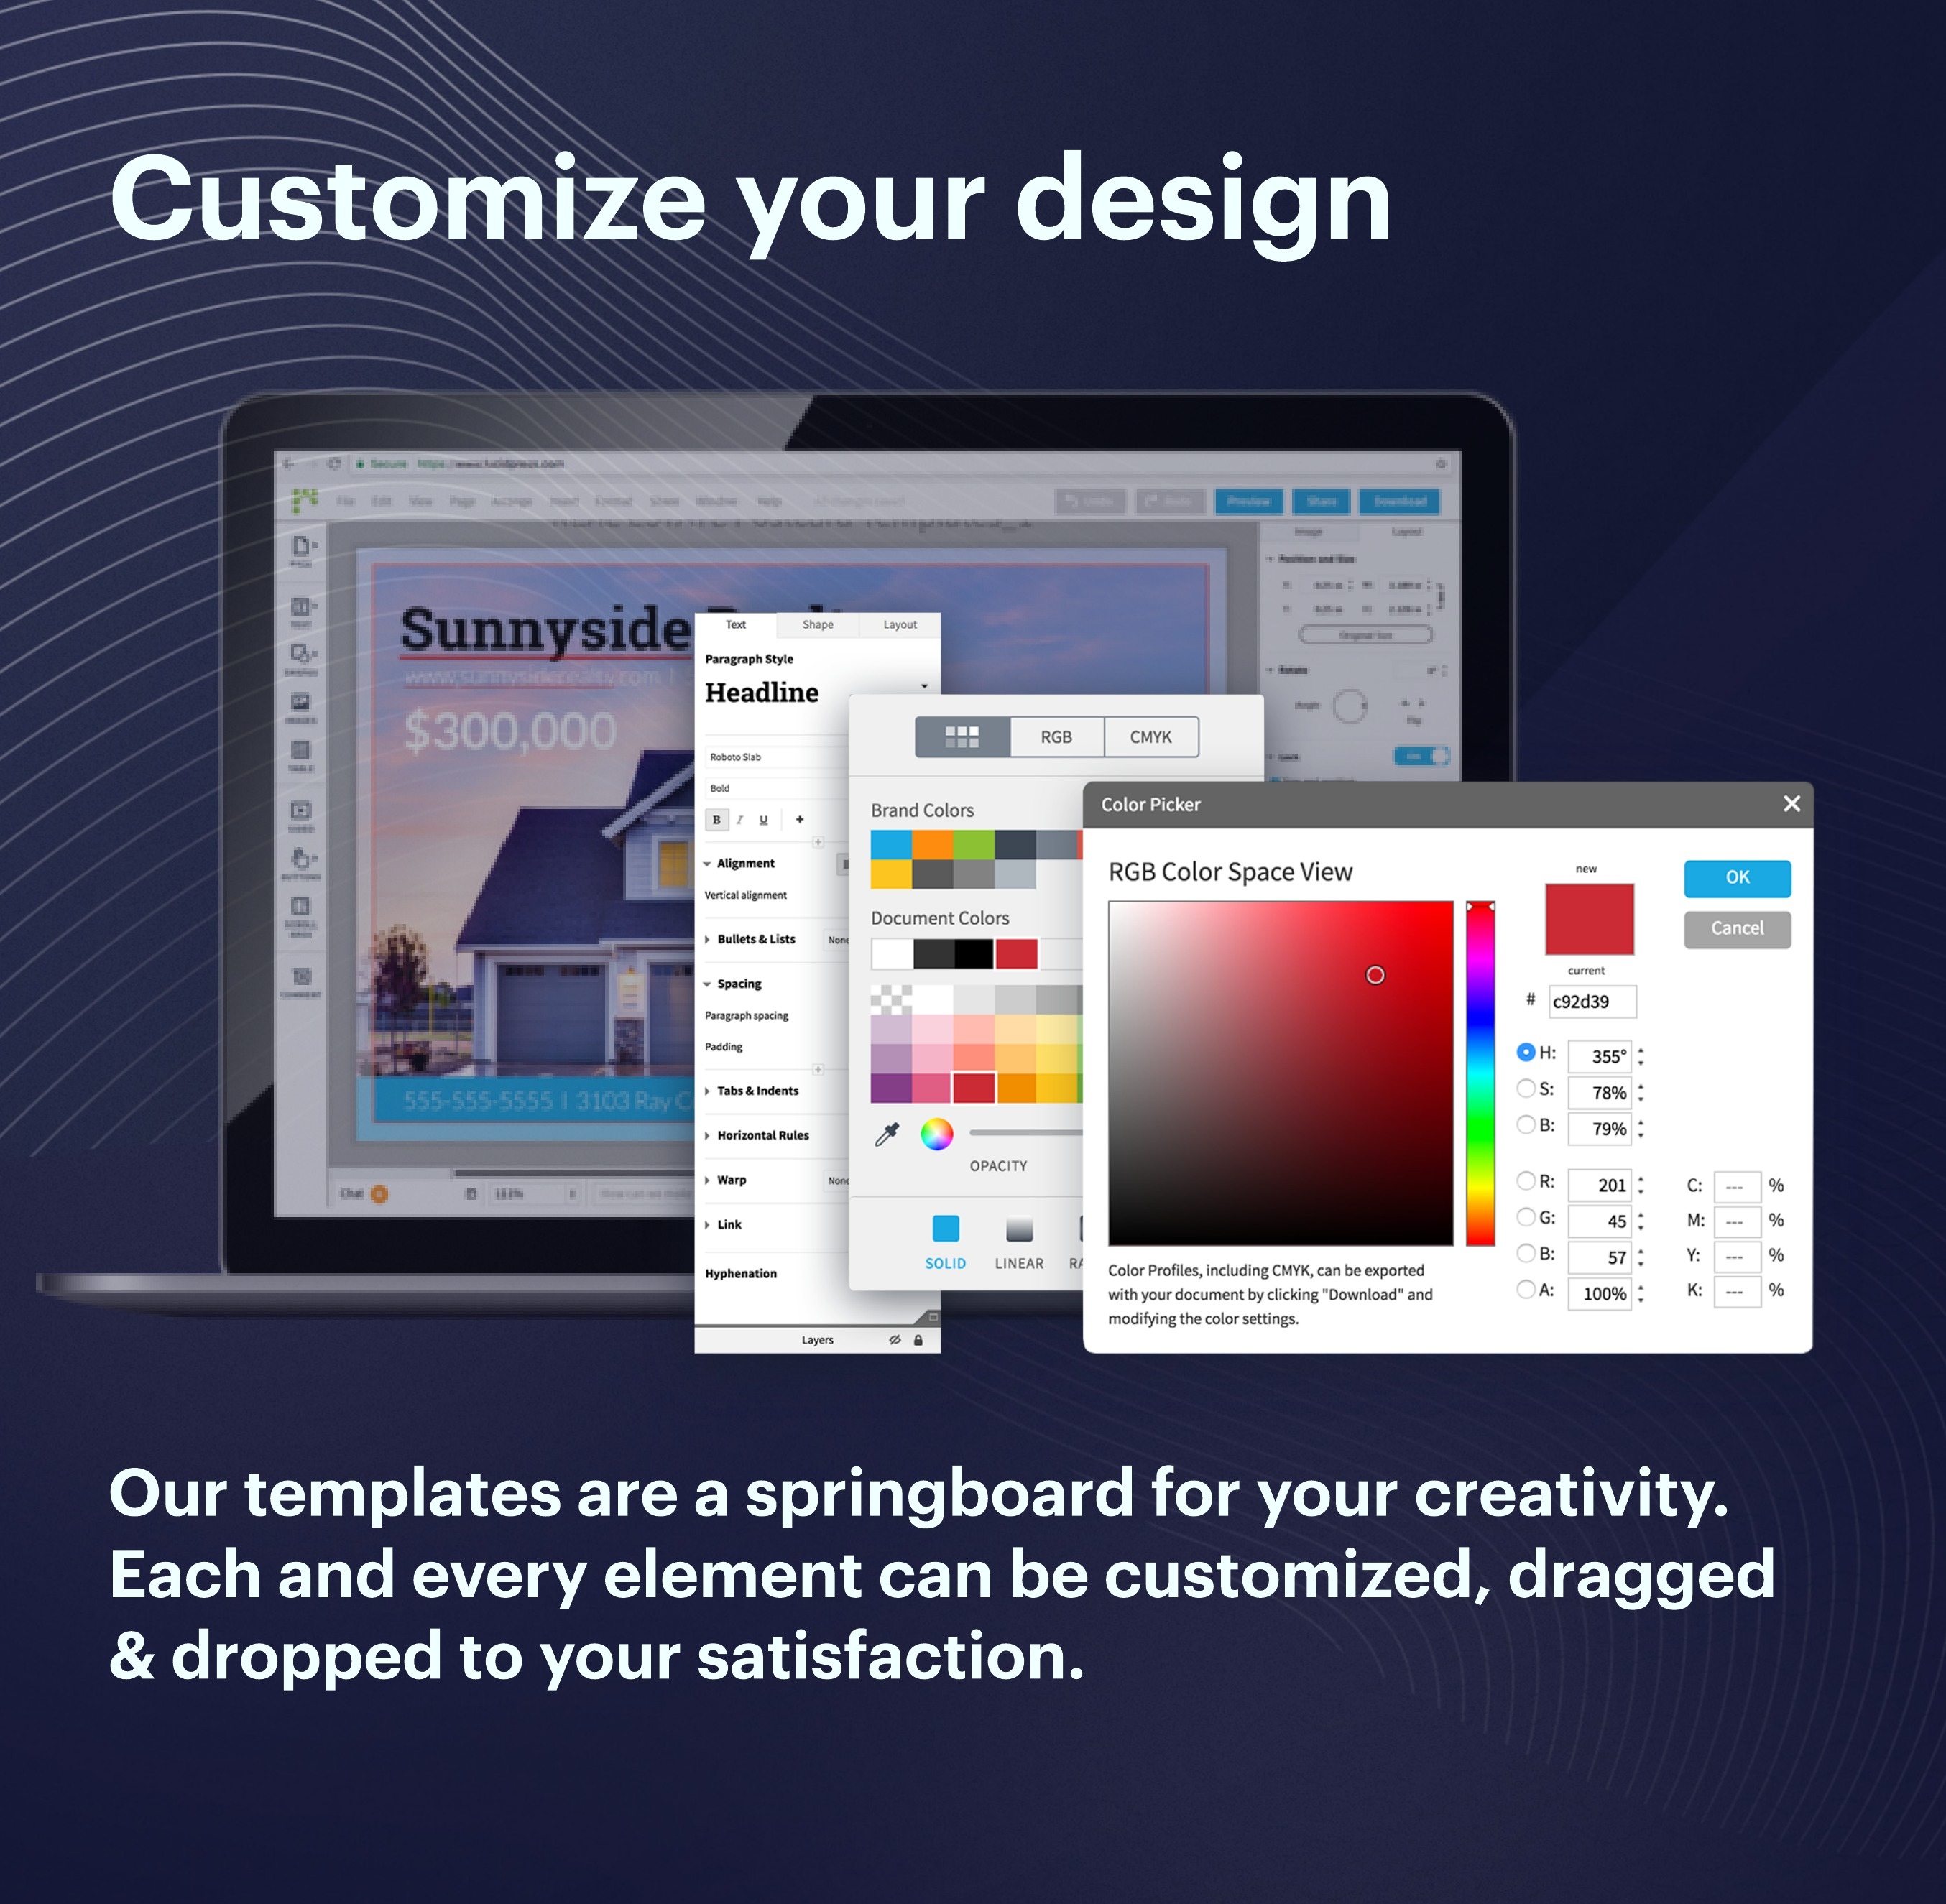 Lucidpress Software - Our templates are a springboard for your creativity. Each and every element can be customized, dragged and dropped to your satisfaction.